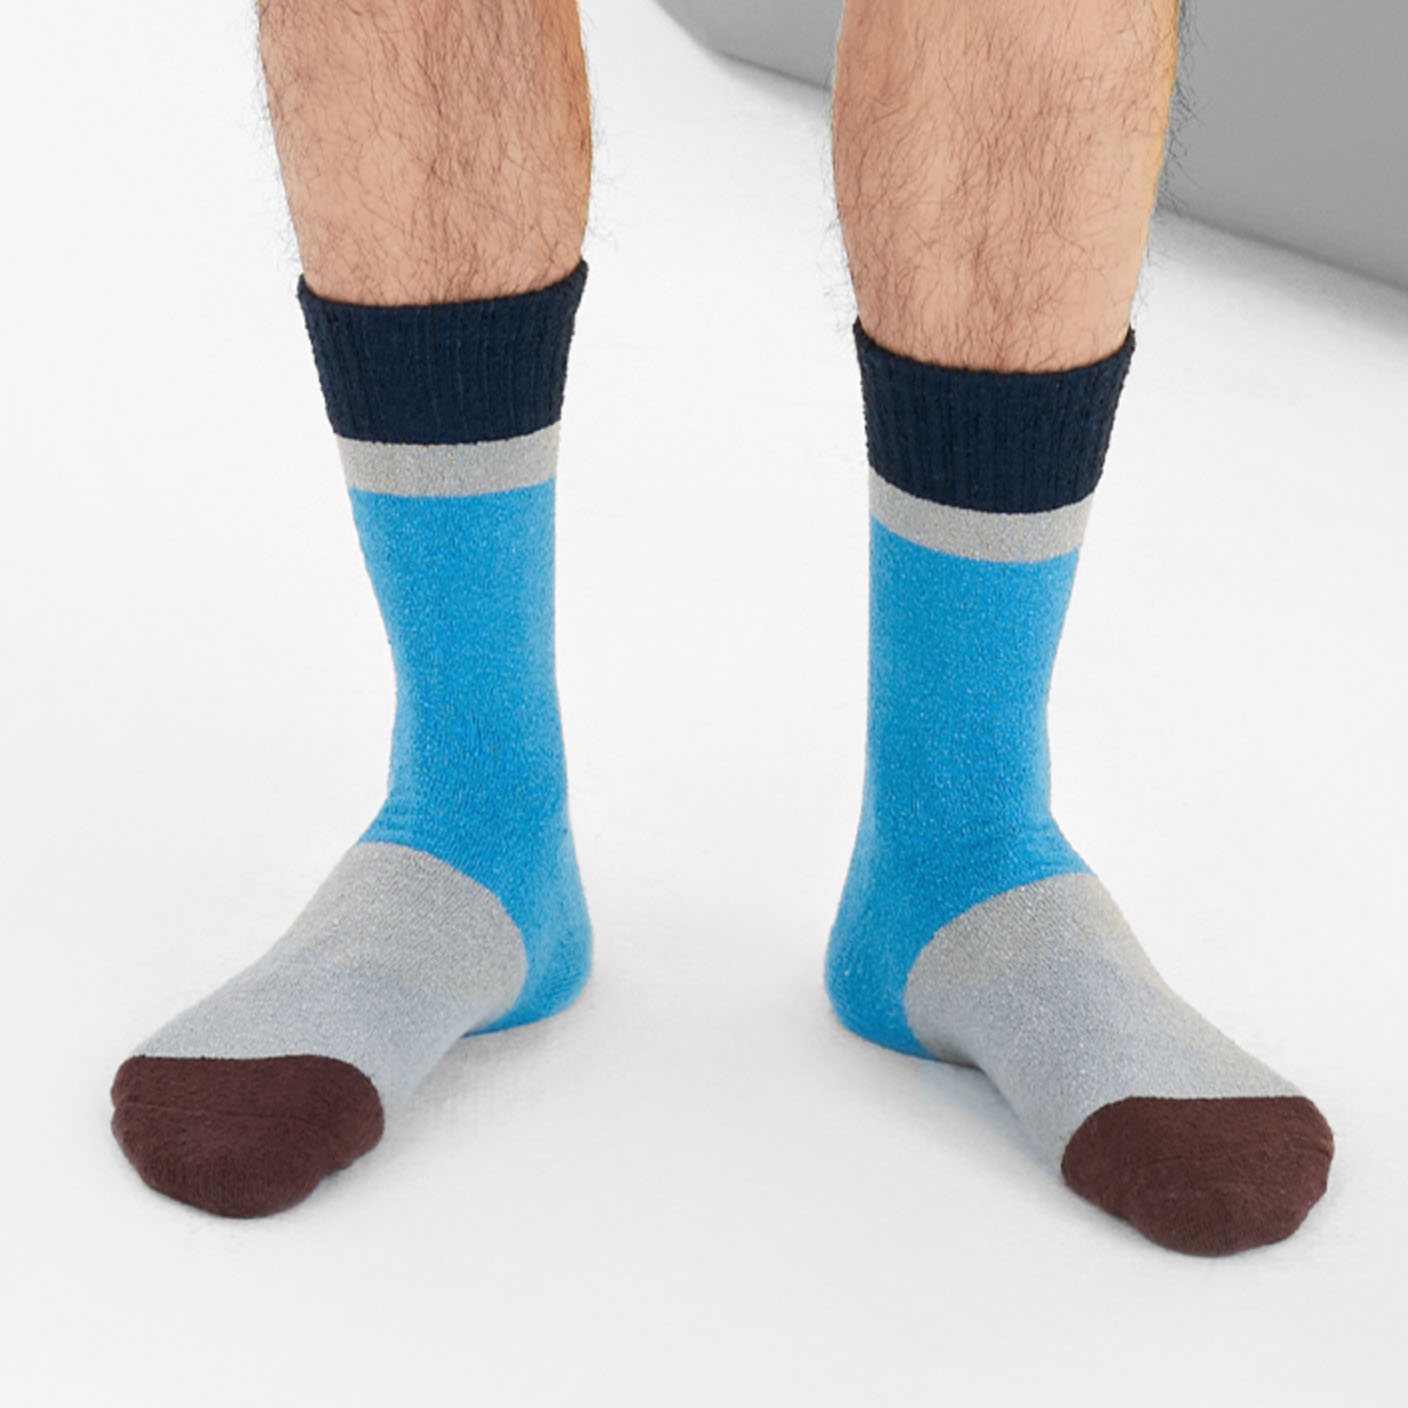 Fluffy Socks for Everyday Wear, Hiking, and Running